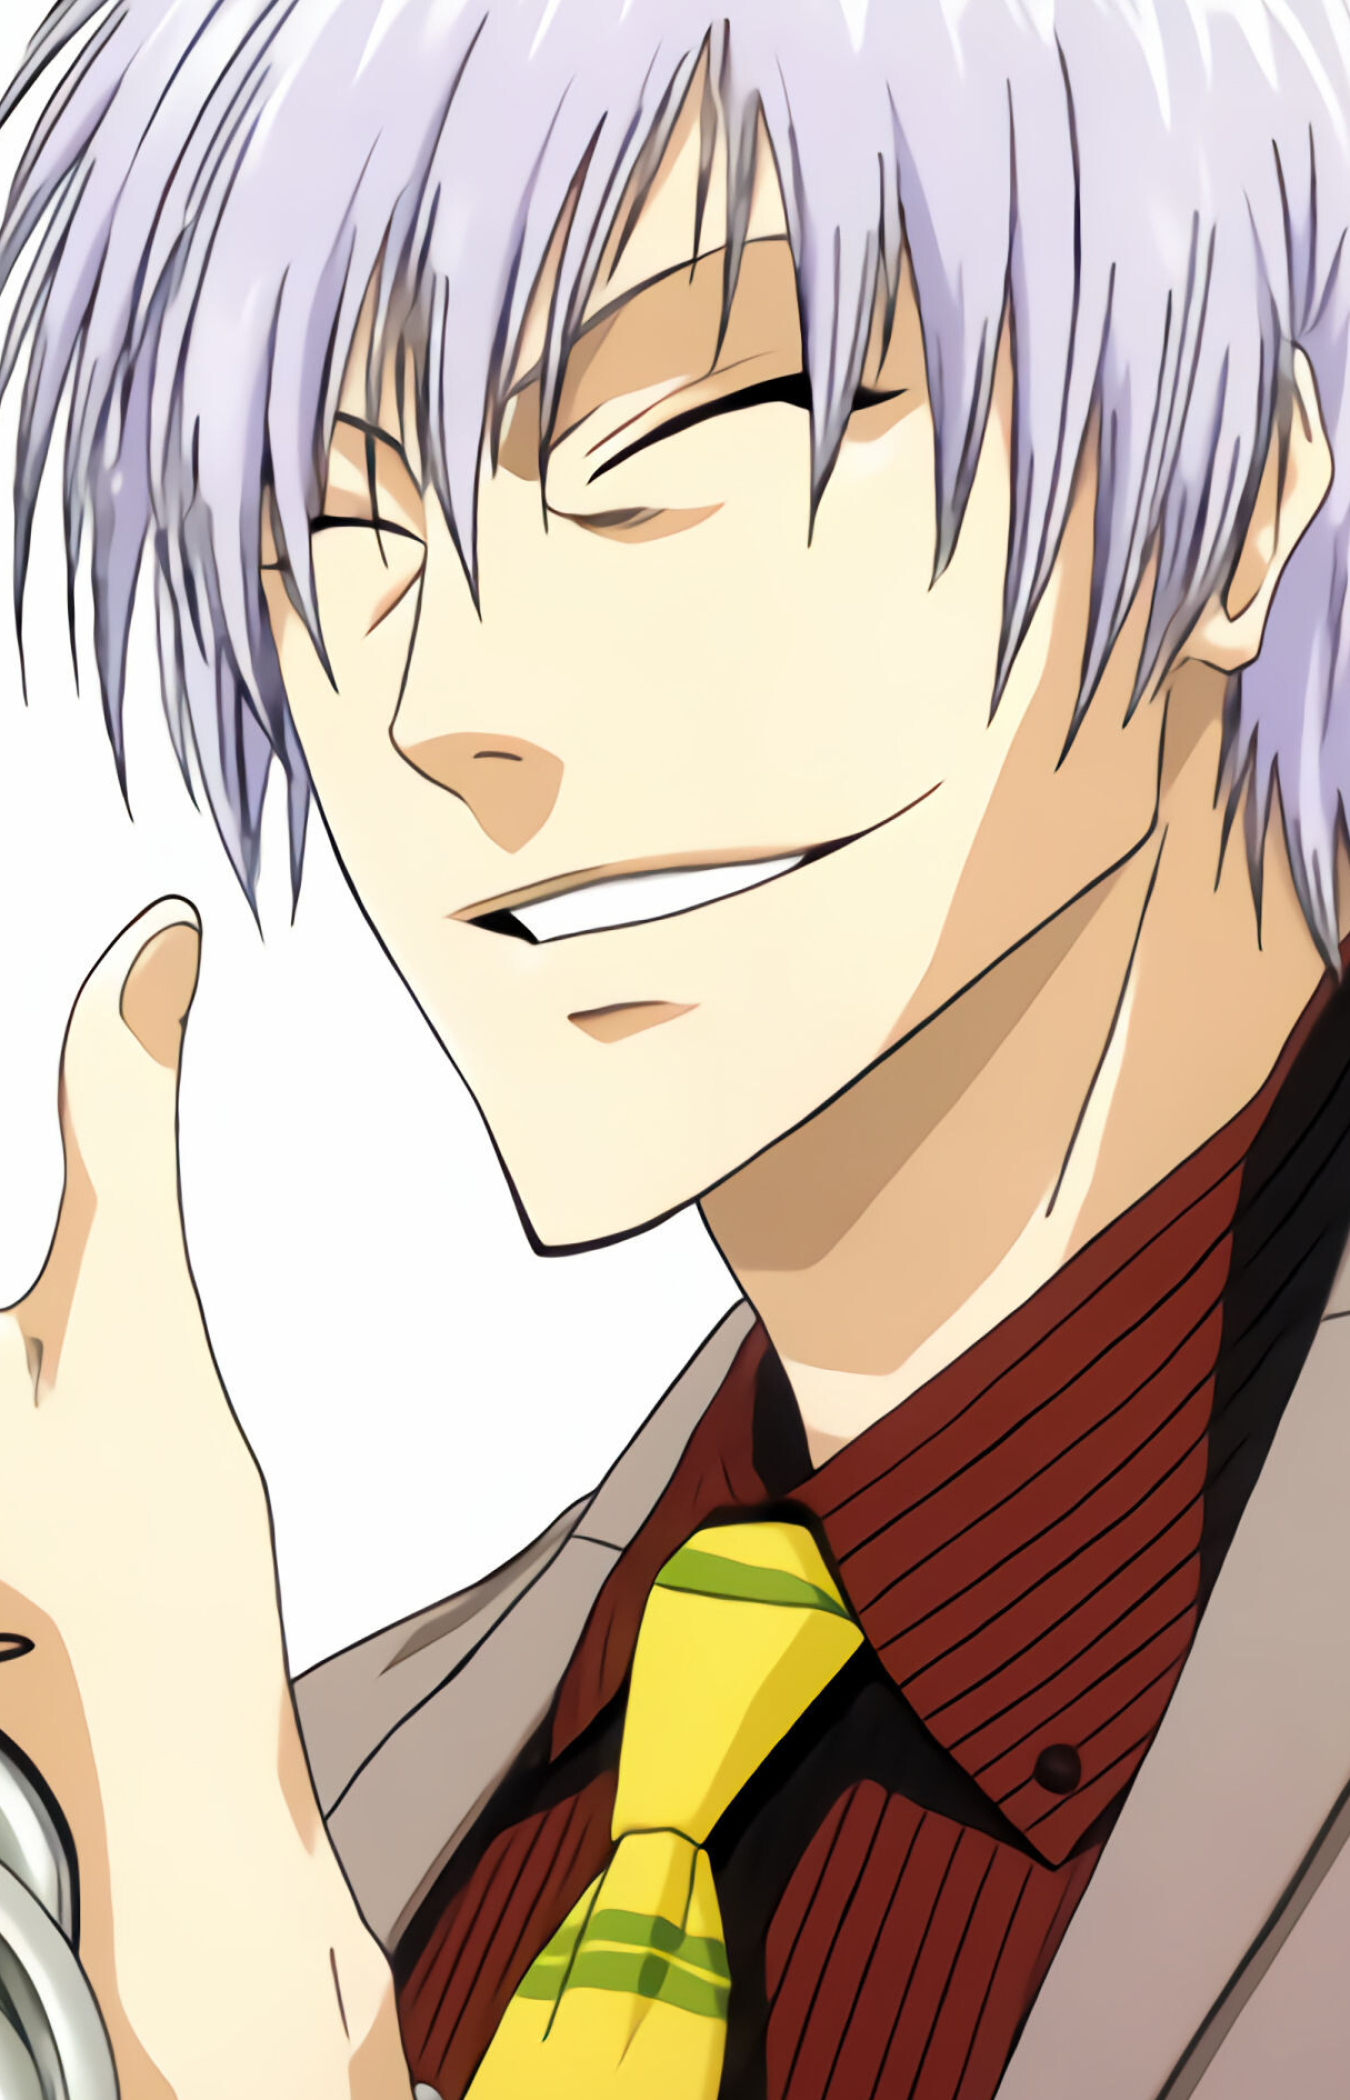 Gin Ichimaru: Voiced by Kōji Yusa in the Japanese version of the anime, A mysterious character, A wide mocking smile. 1350x2100 HD Wallpaper.